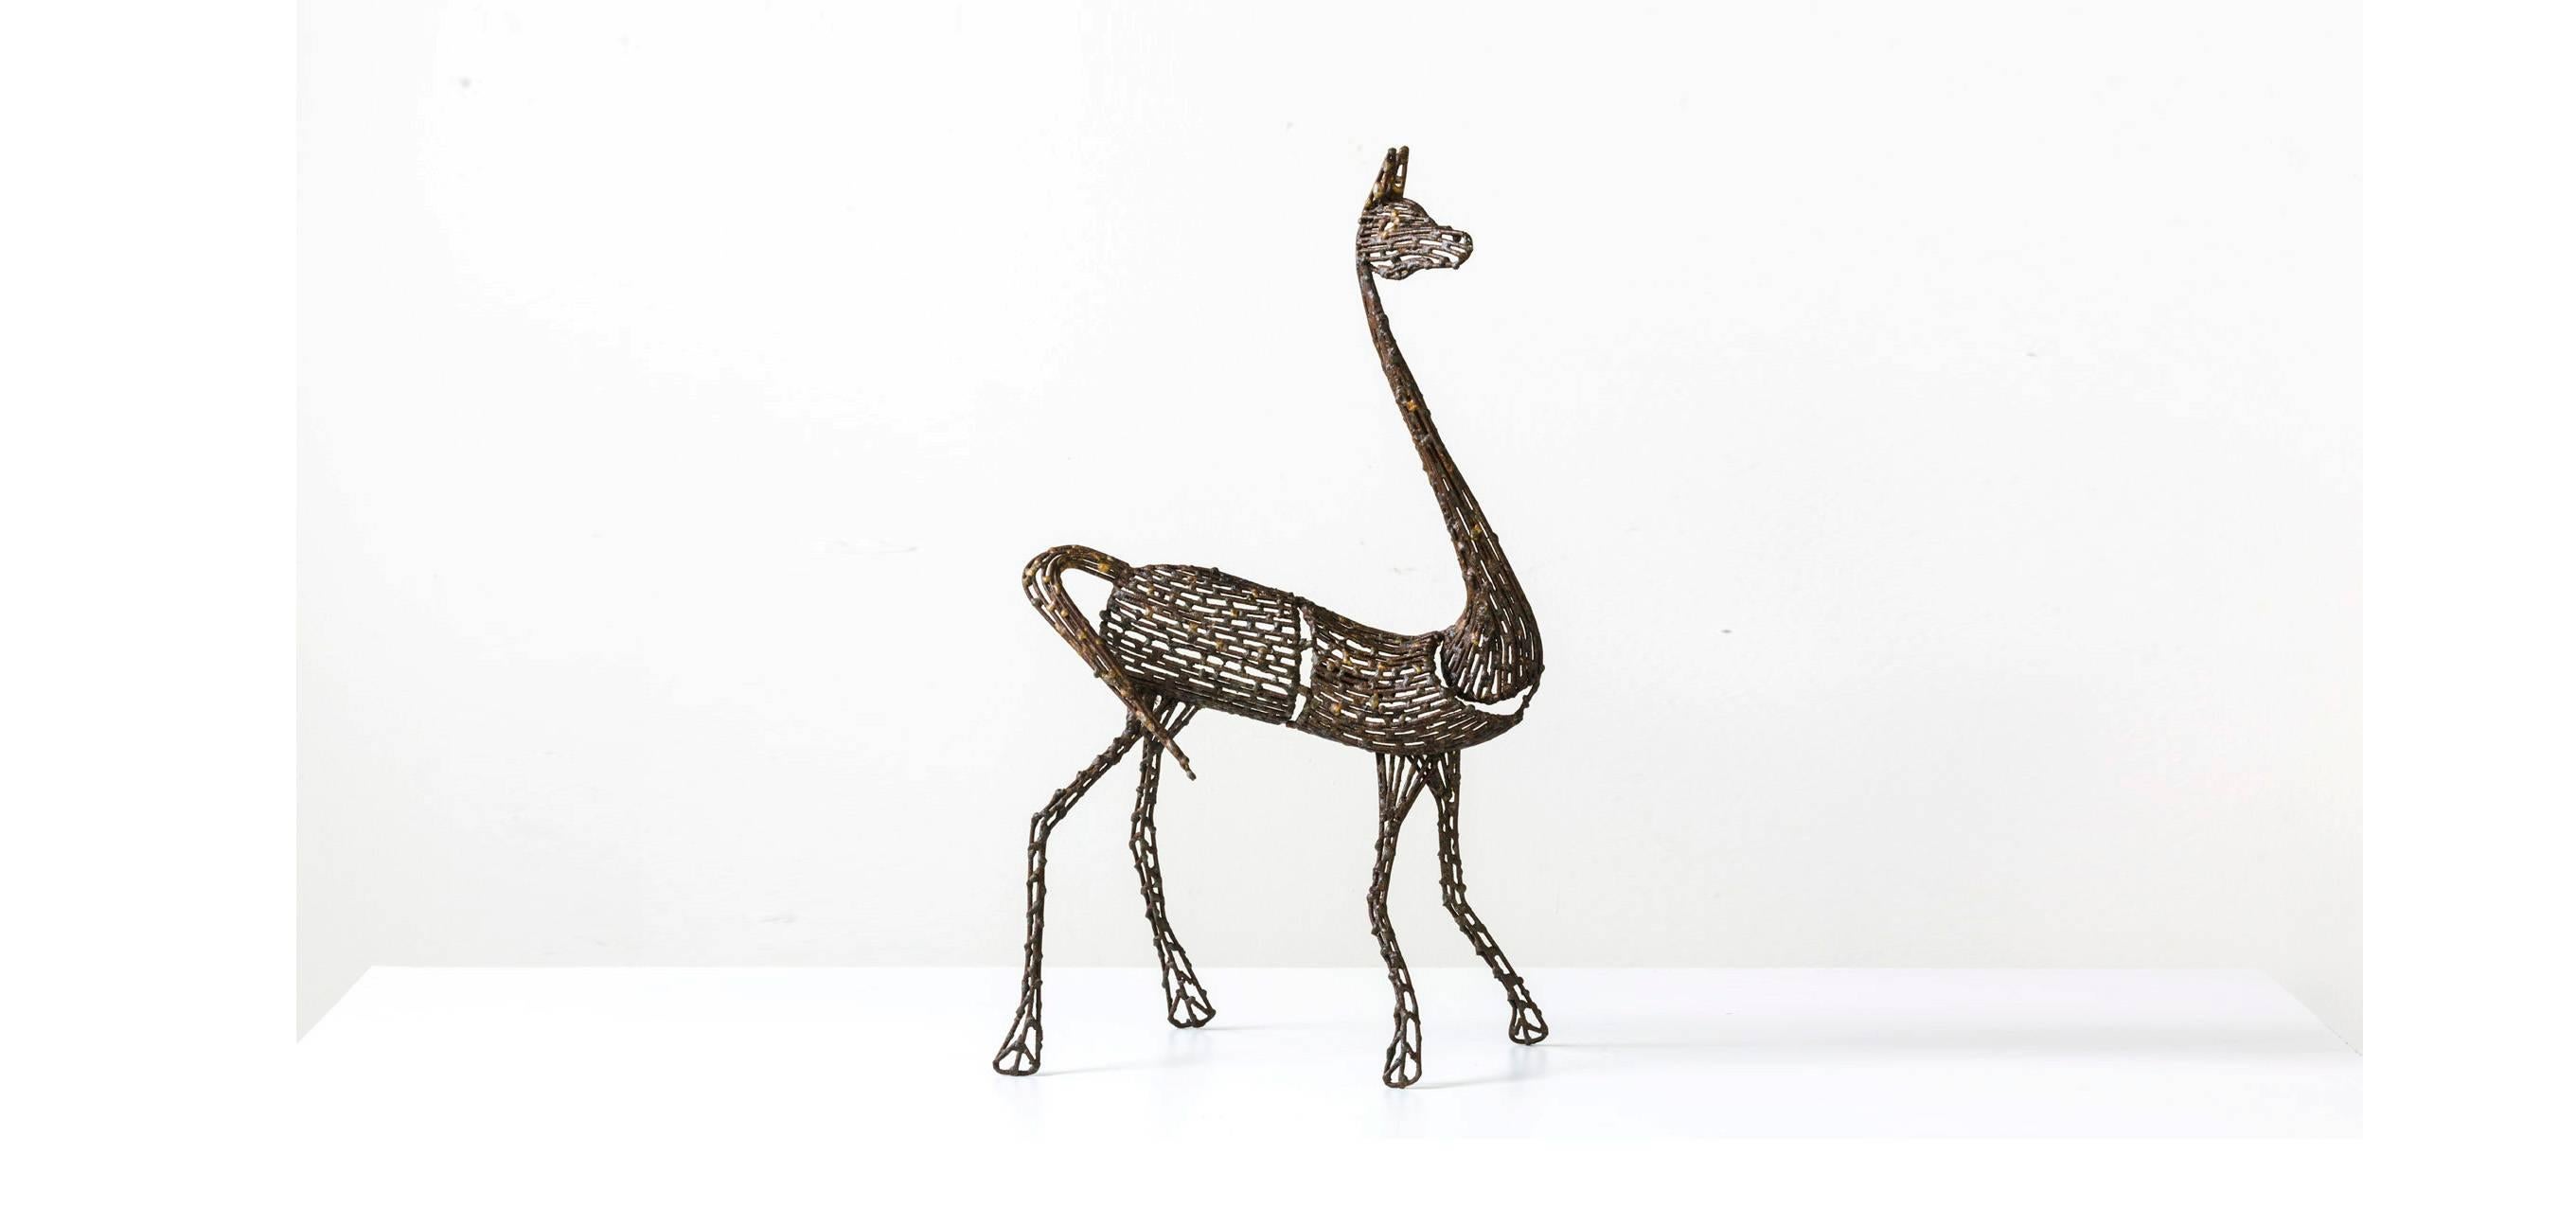 Giraffe sculpture by Salvino Marsura, hand welded from individual fragments of steel rod and finished in baked powder colored pigments. Extremely intricate metal work.
Made in Italy.